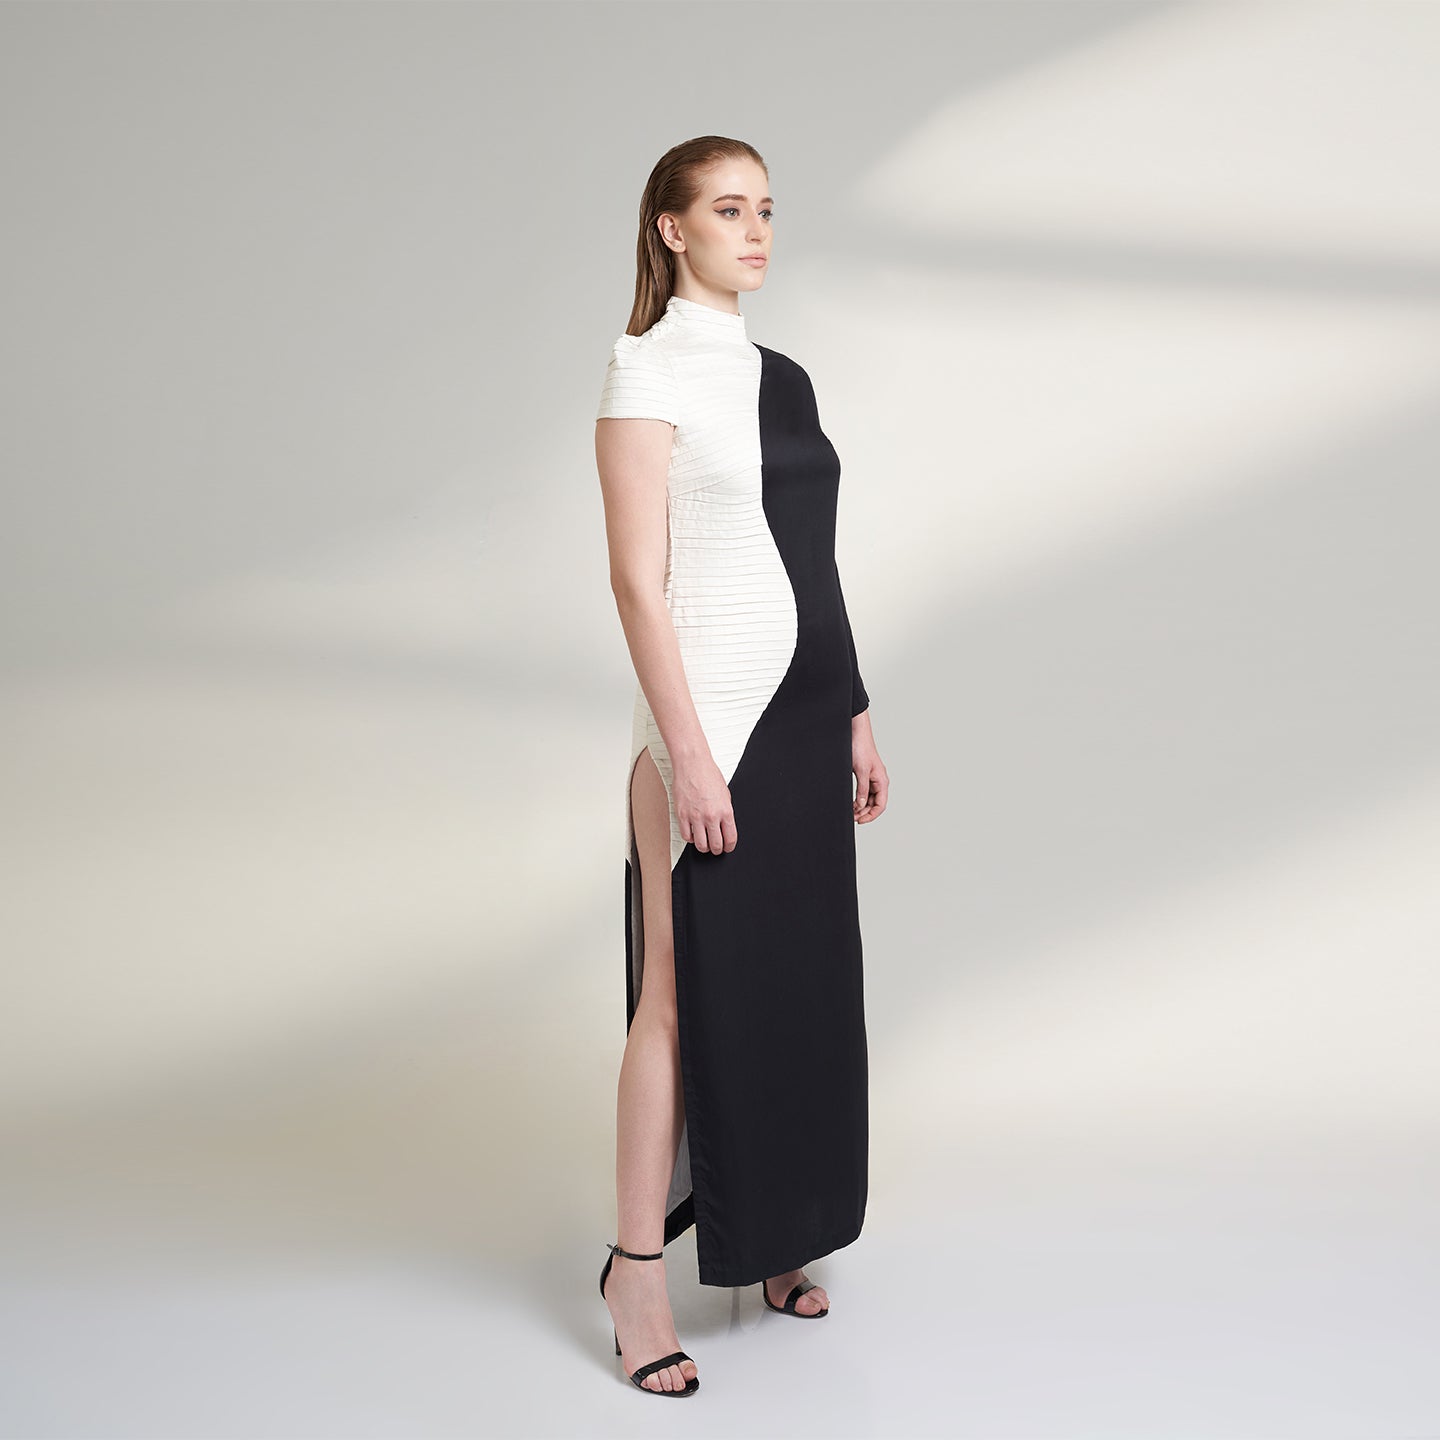 A medium size model wearing a black and white half and half dress made from organic lotus stem fabric. This sustainable vegan dress is a long floor length dress with one side pleated in white and one side plain black with a thigh high side slit striking a side pose.